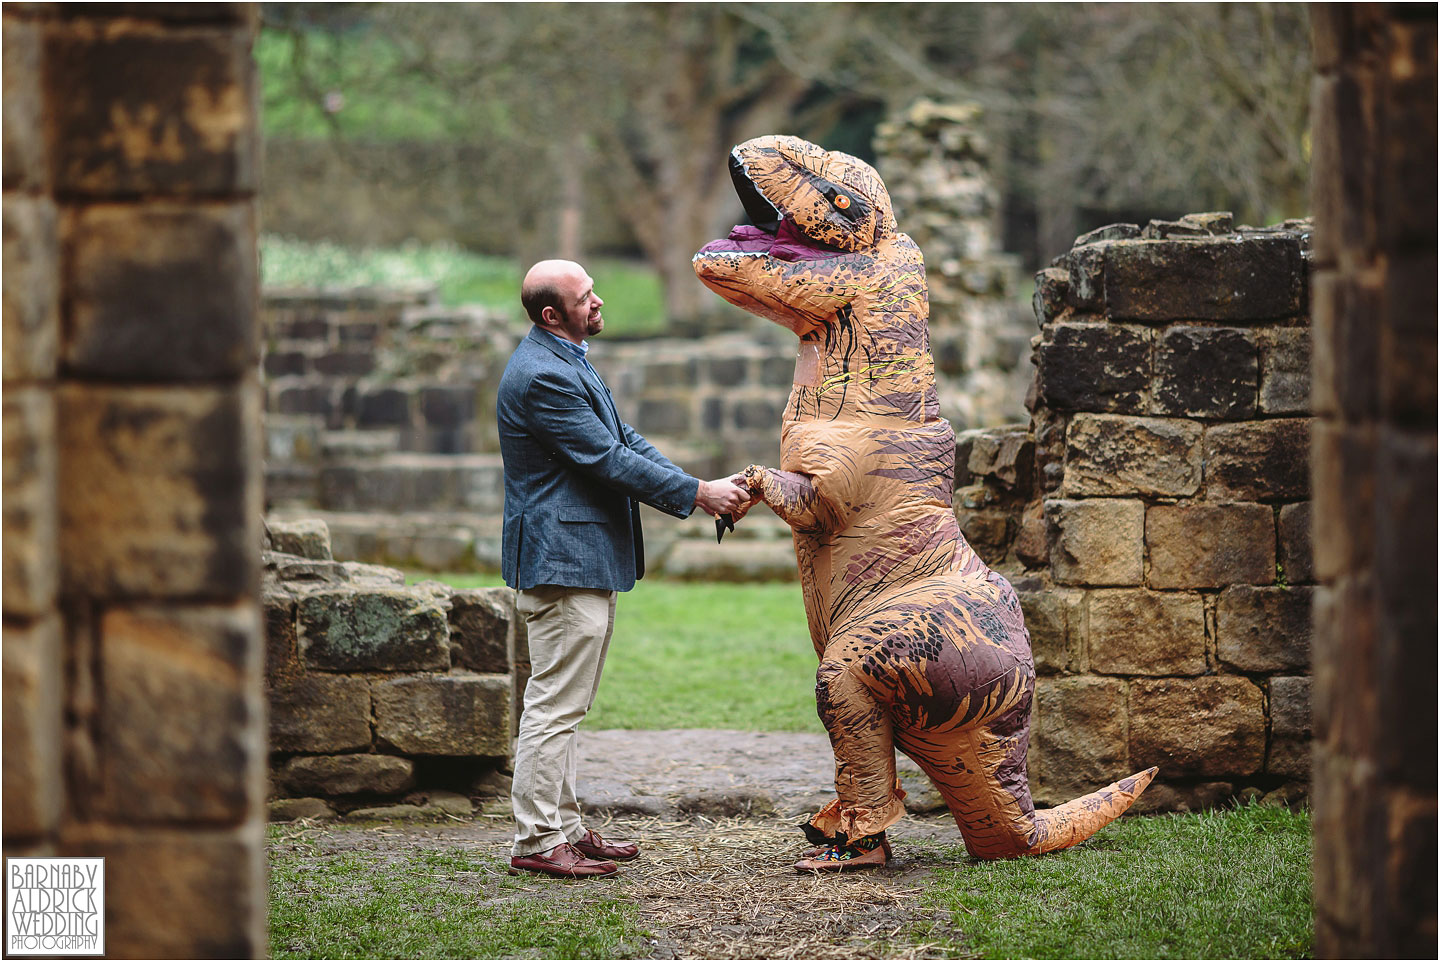 Inflatable dinosaur pre-wedding photo, Wedding couple photos at Priory Cottages near Wetherby, Amazing Yorkshire Wedding Photos, Best Yorkshire Wedding Photos 2018